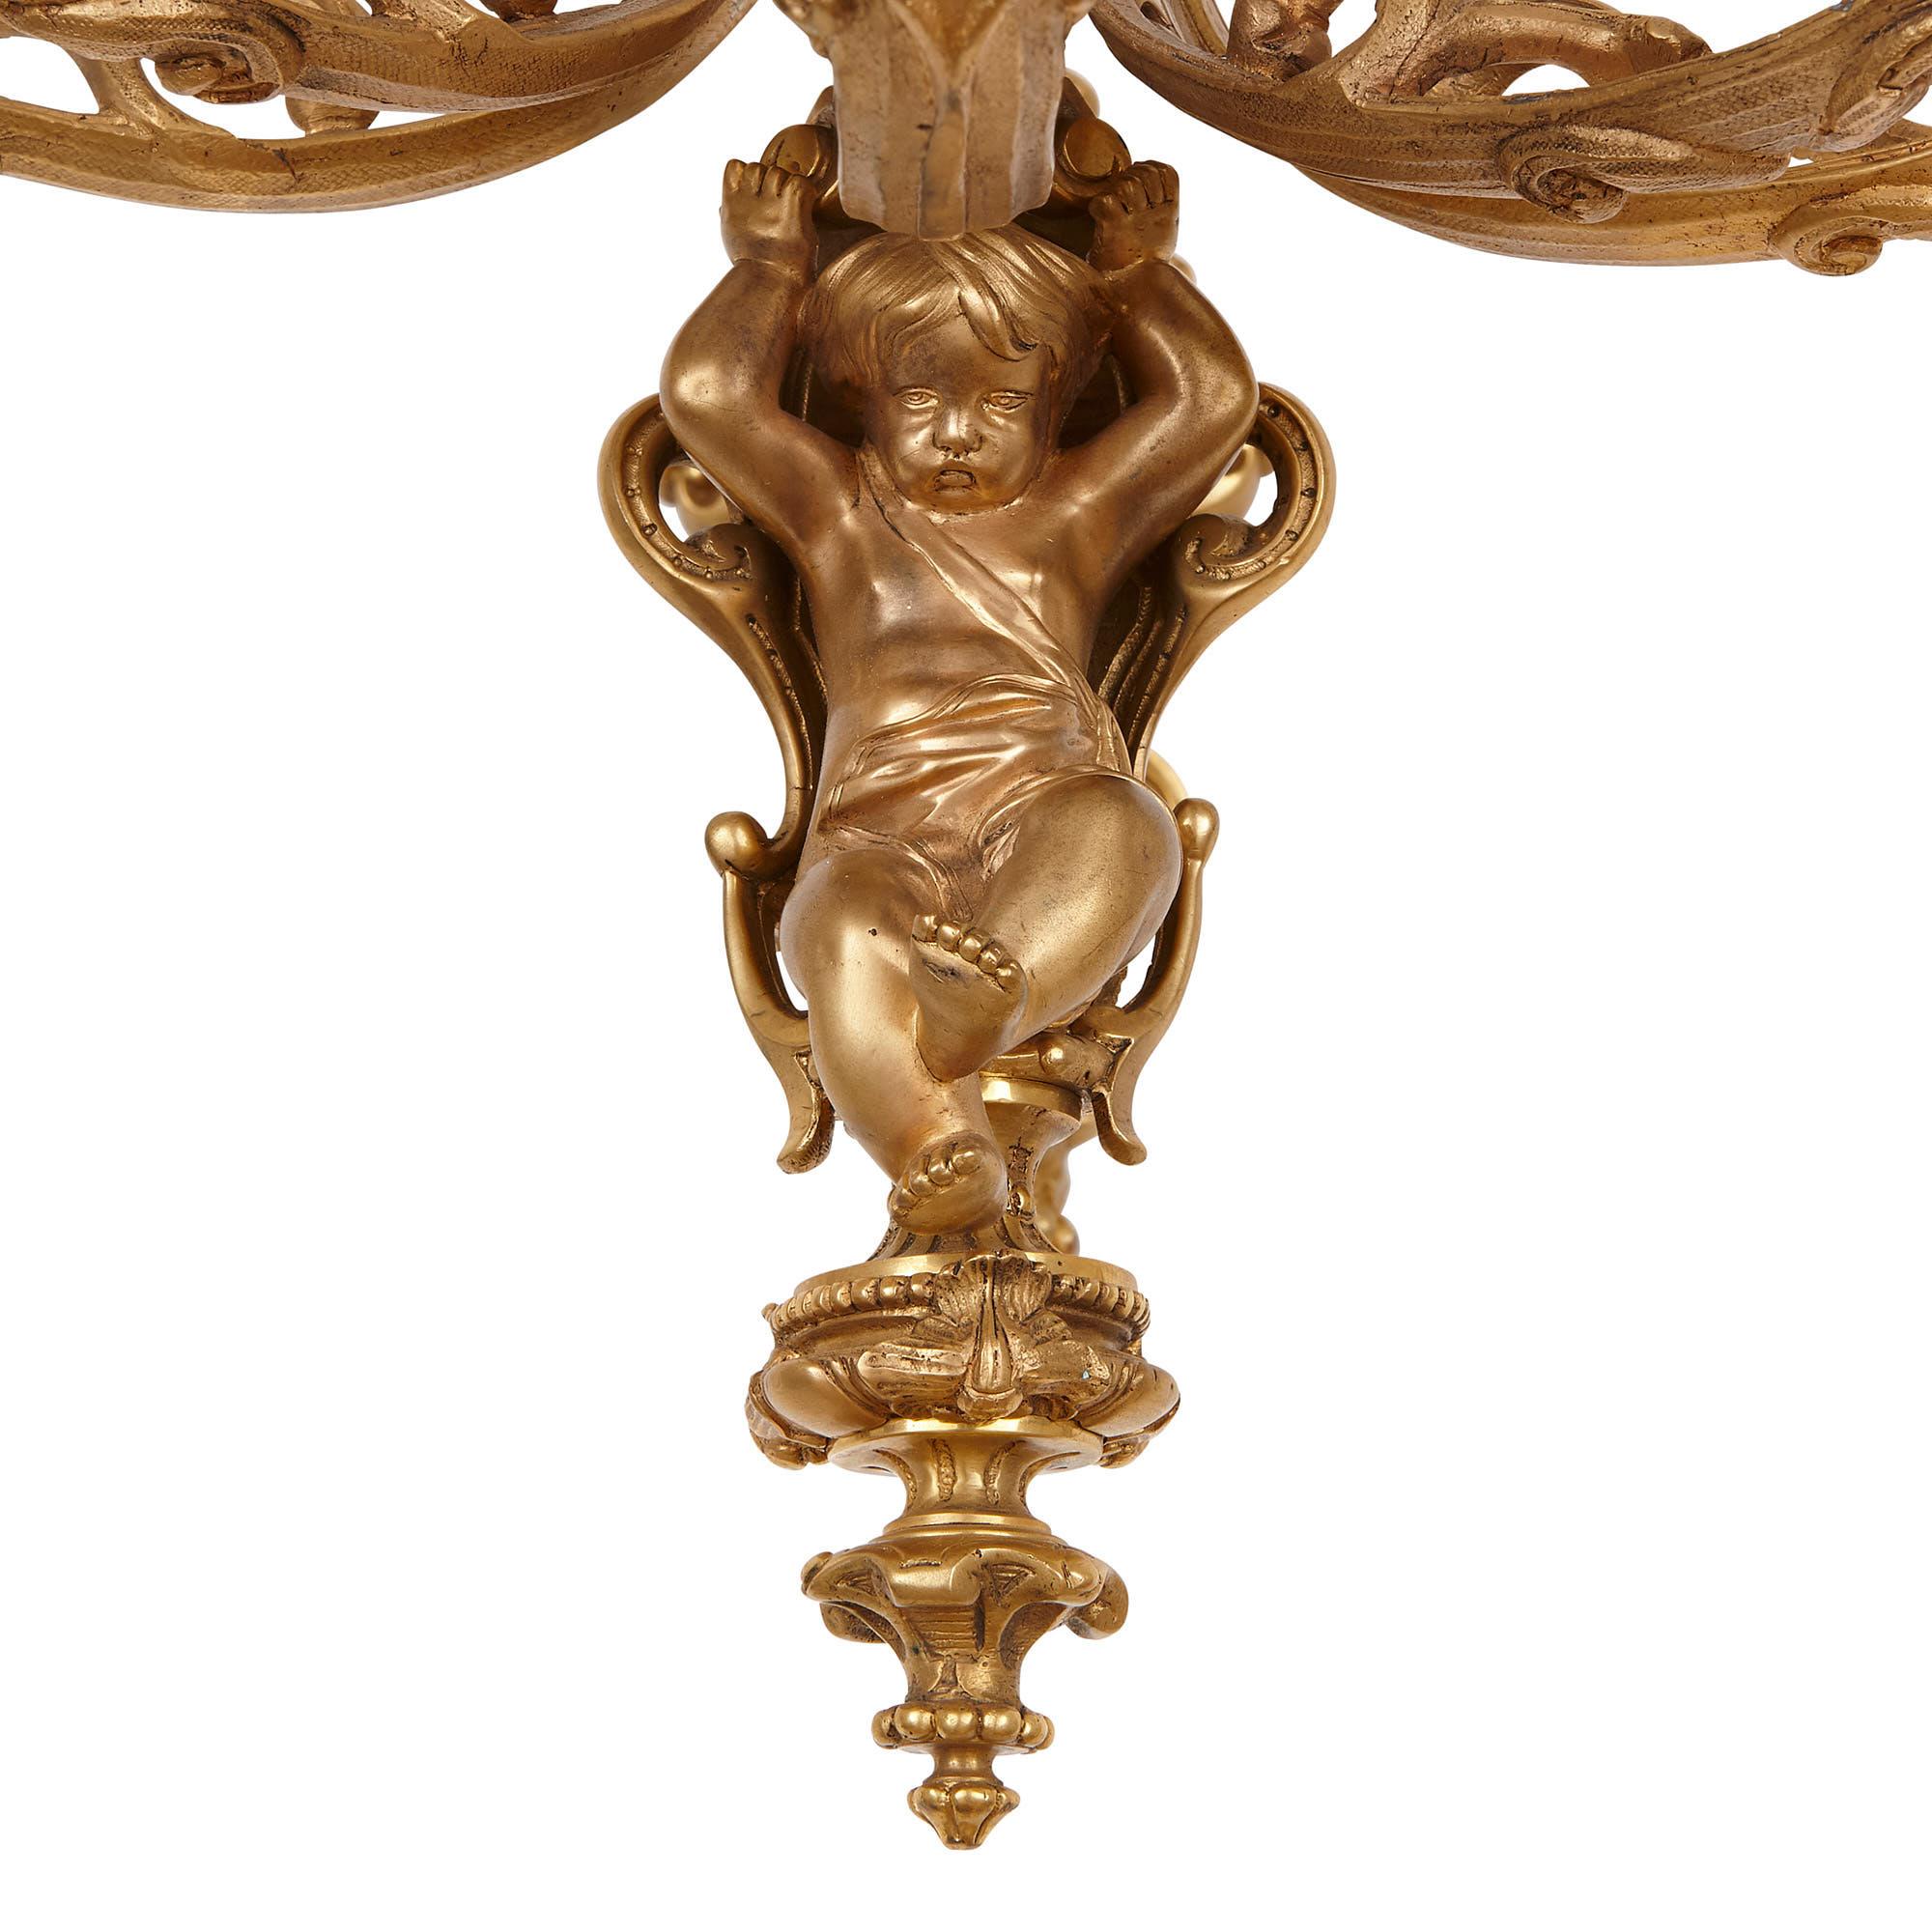 This pair of gilt bronze sconces (or wall lights) have been styled in the Rococo manner, being composed of beautiful, scrolling forms inspired by nature. 

The six arms of each sconce spring from a backplate, which is decorated with scrollwork,